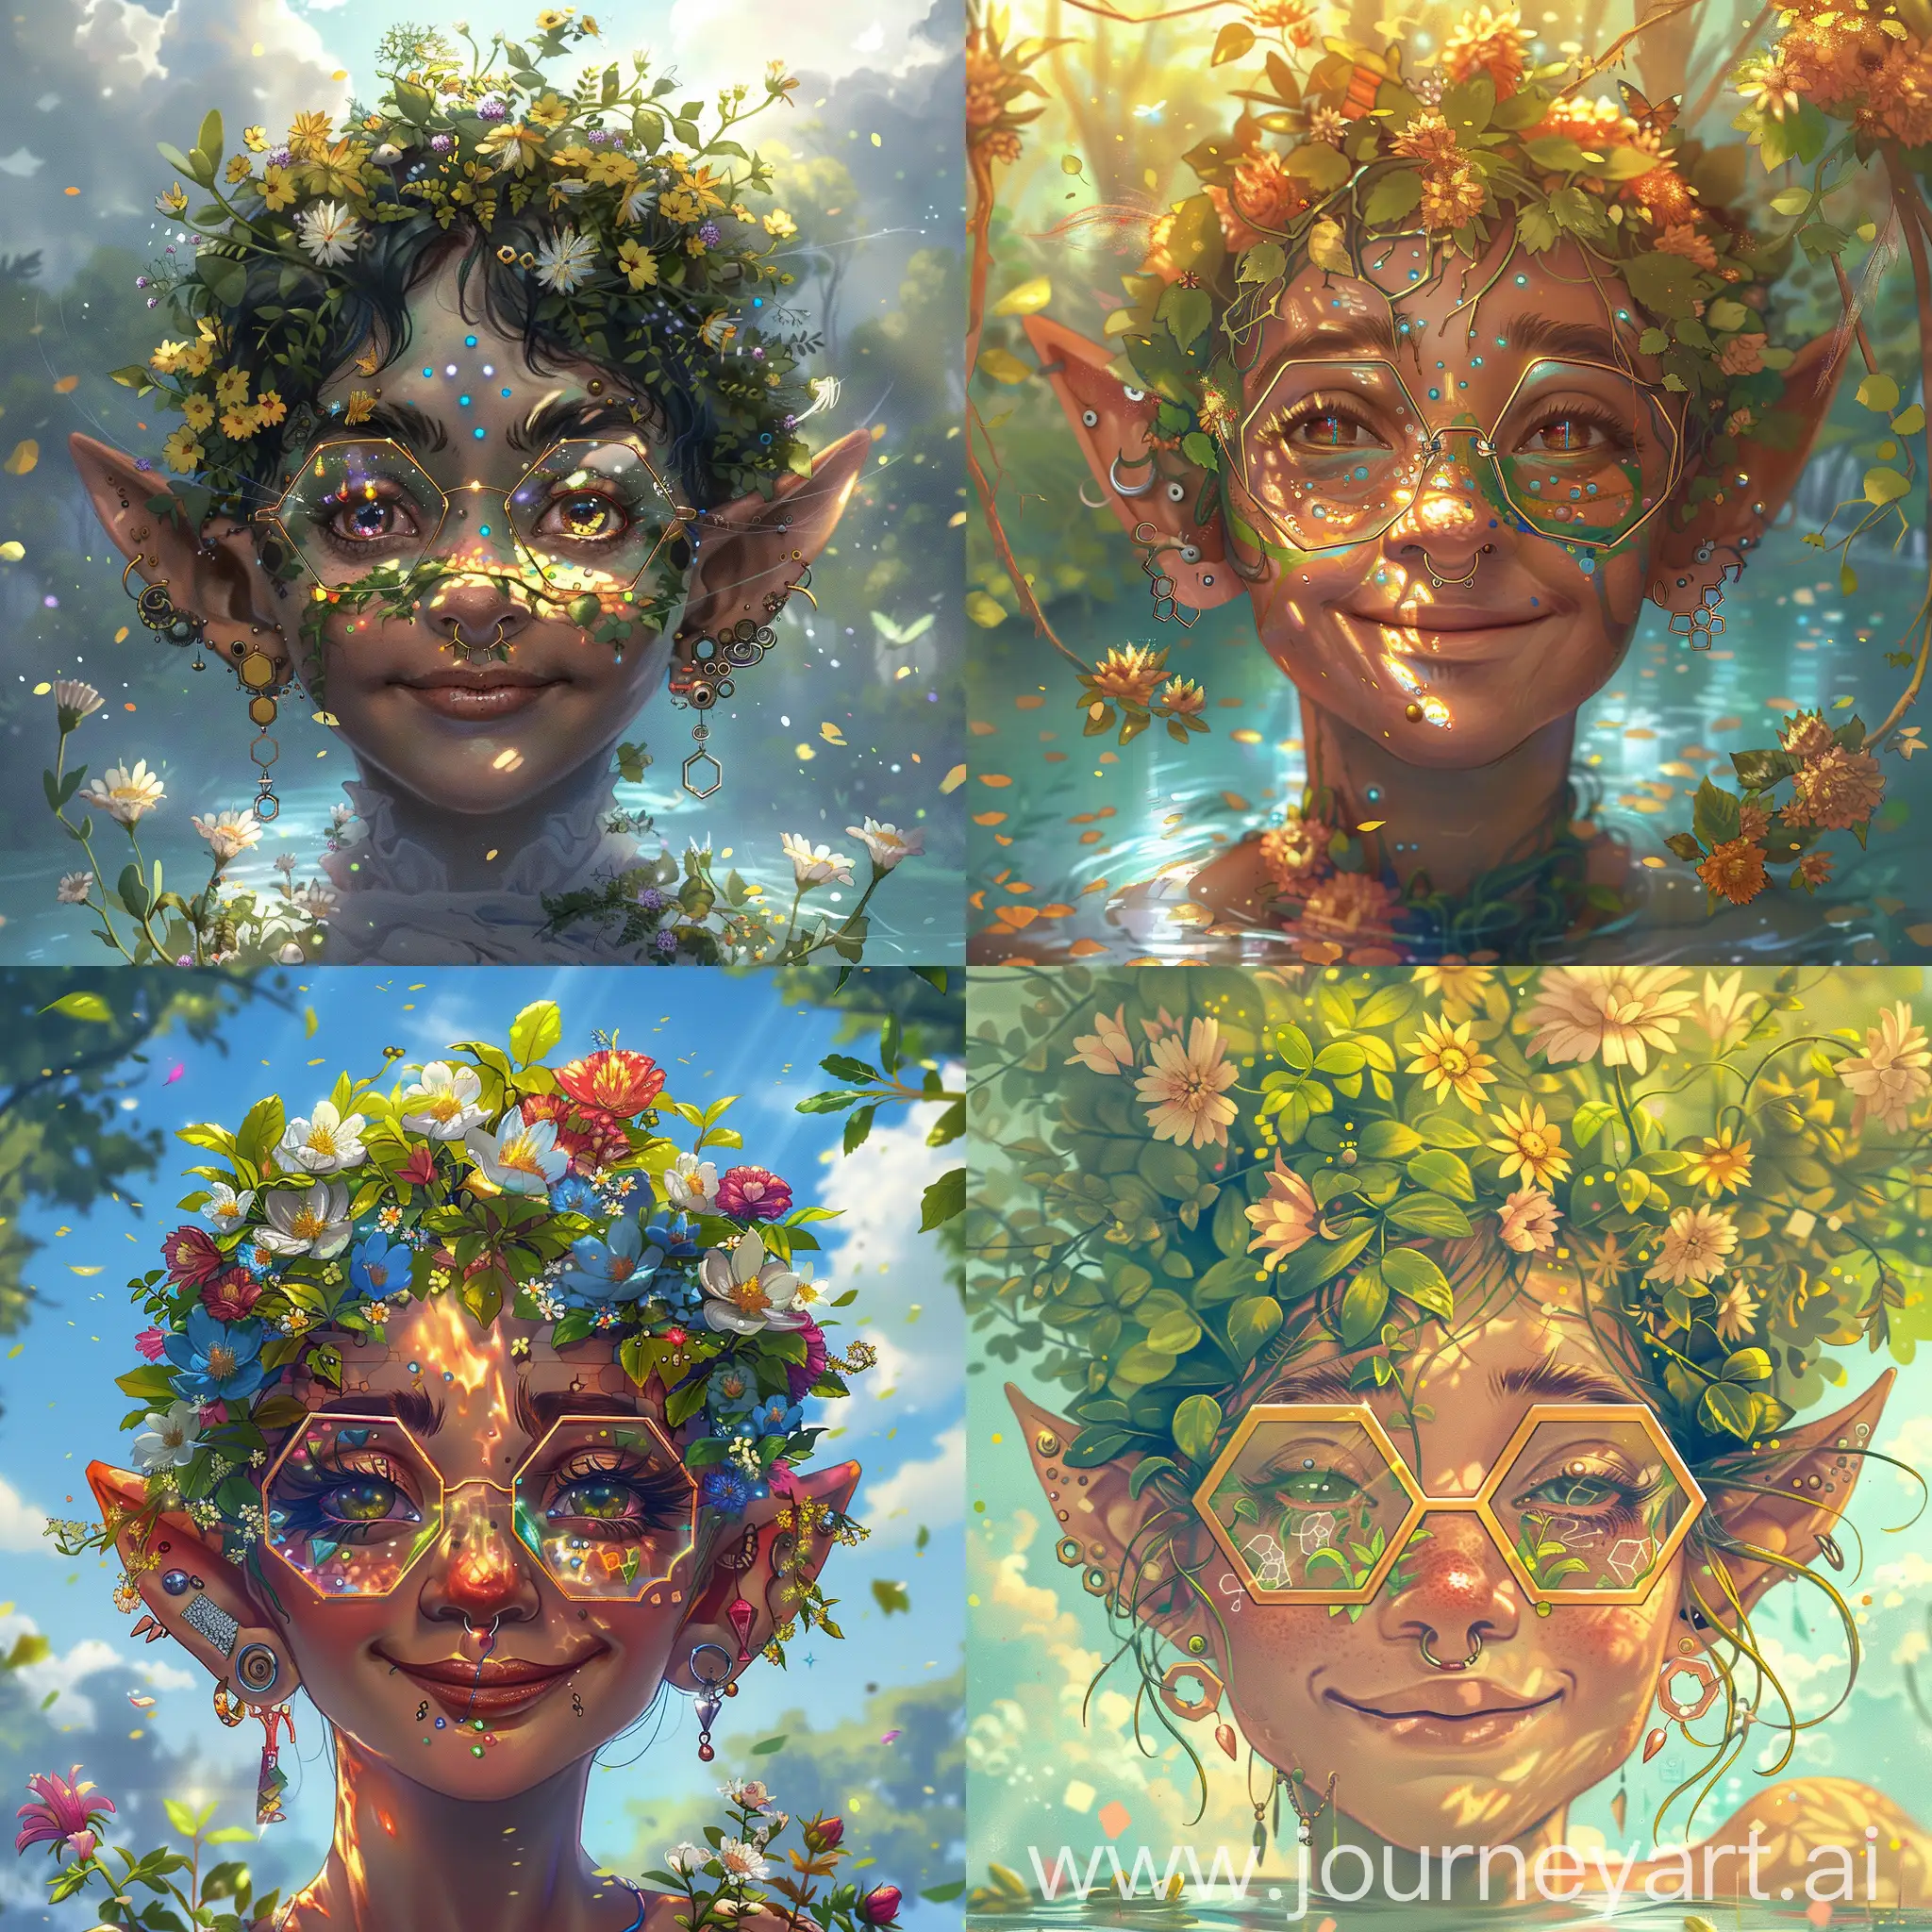 Please design a mystical humanoid forest creature based on the following description: In my highest form my eyes have a pixie like (almost mischievous) sparkle in them, and a smile that is shown in every inch of my face. I’ve got small ears covered in piercings. I wear hexagonal glasses and my face is hidden behind a full fringe. Oval face with small eyes, big eyebrows and a pointy nose. I love a warm cup of tea, and cosy blankets. But at the same time I love a sparkling river pool and sunshine filtering through the trees. Anything bright and colourful, especially bright flowers. I also fucking love clouds